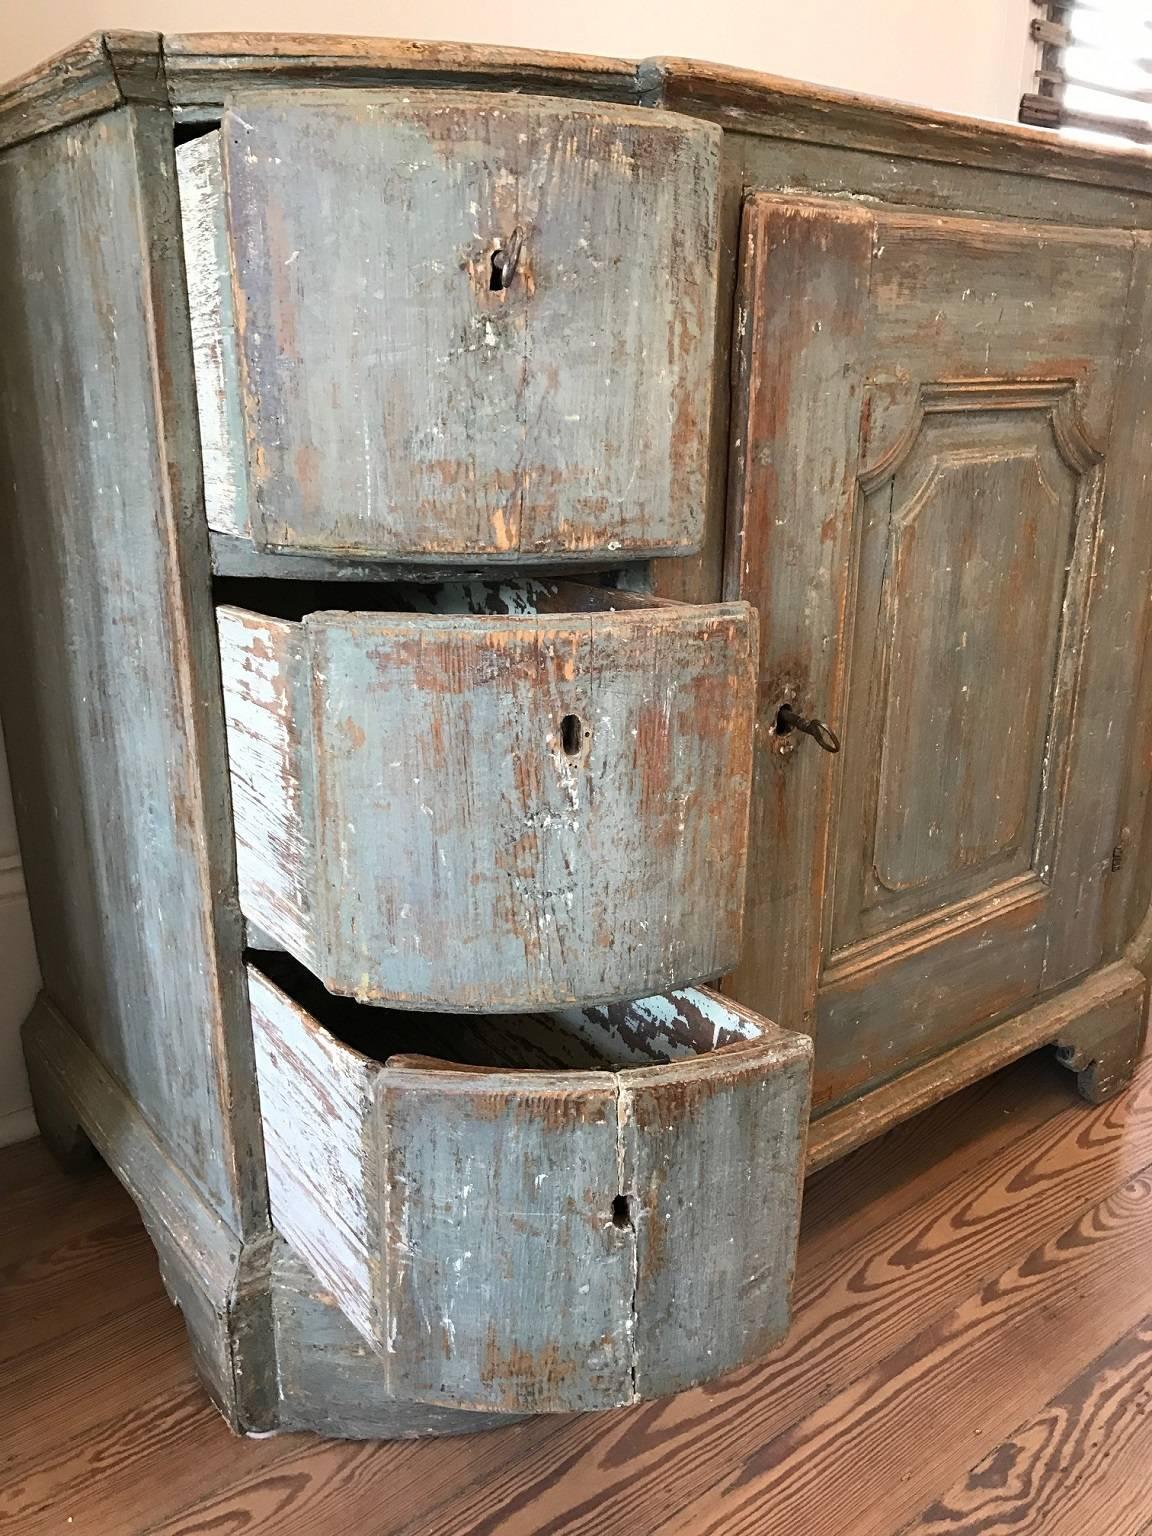 Exceptional period Swedish baroque sideboard scraped to original blue and green paint; central cupboard with three shelves flanked by drawers; wonderful patina.